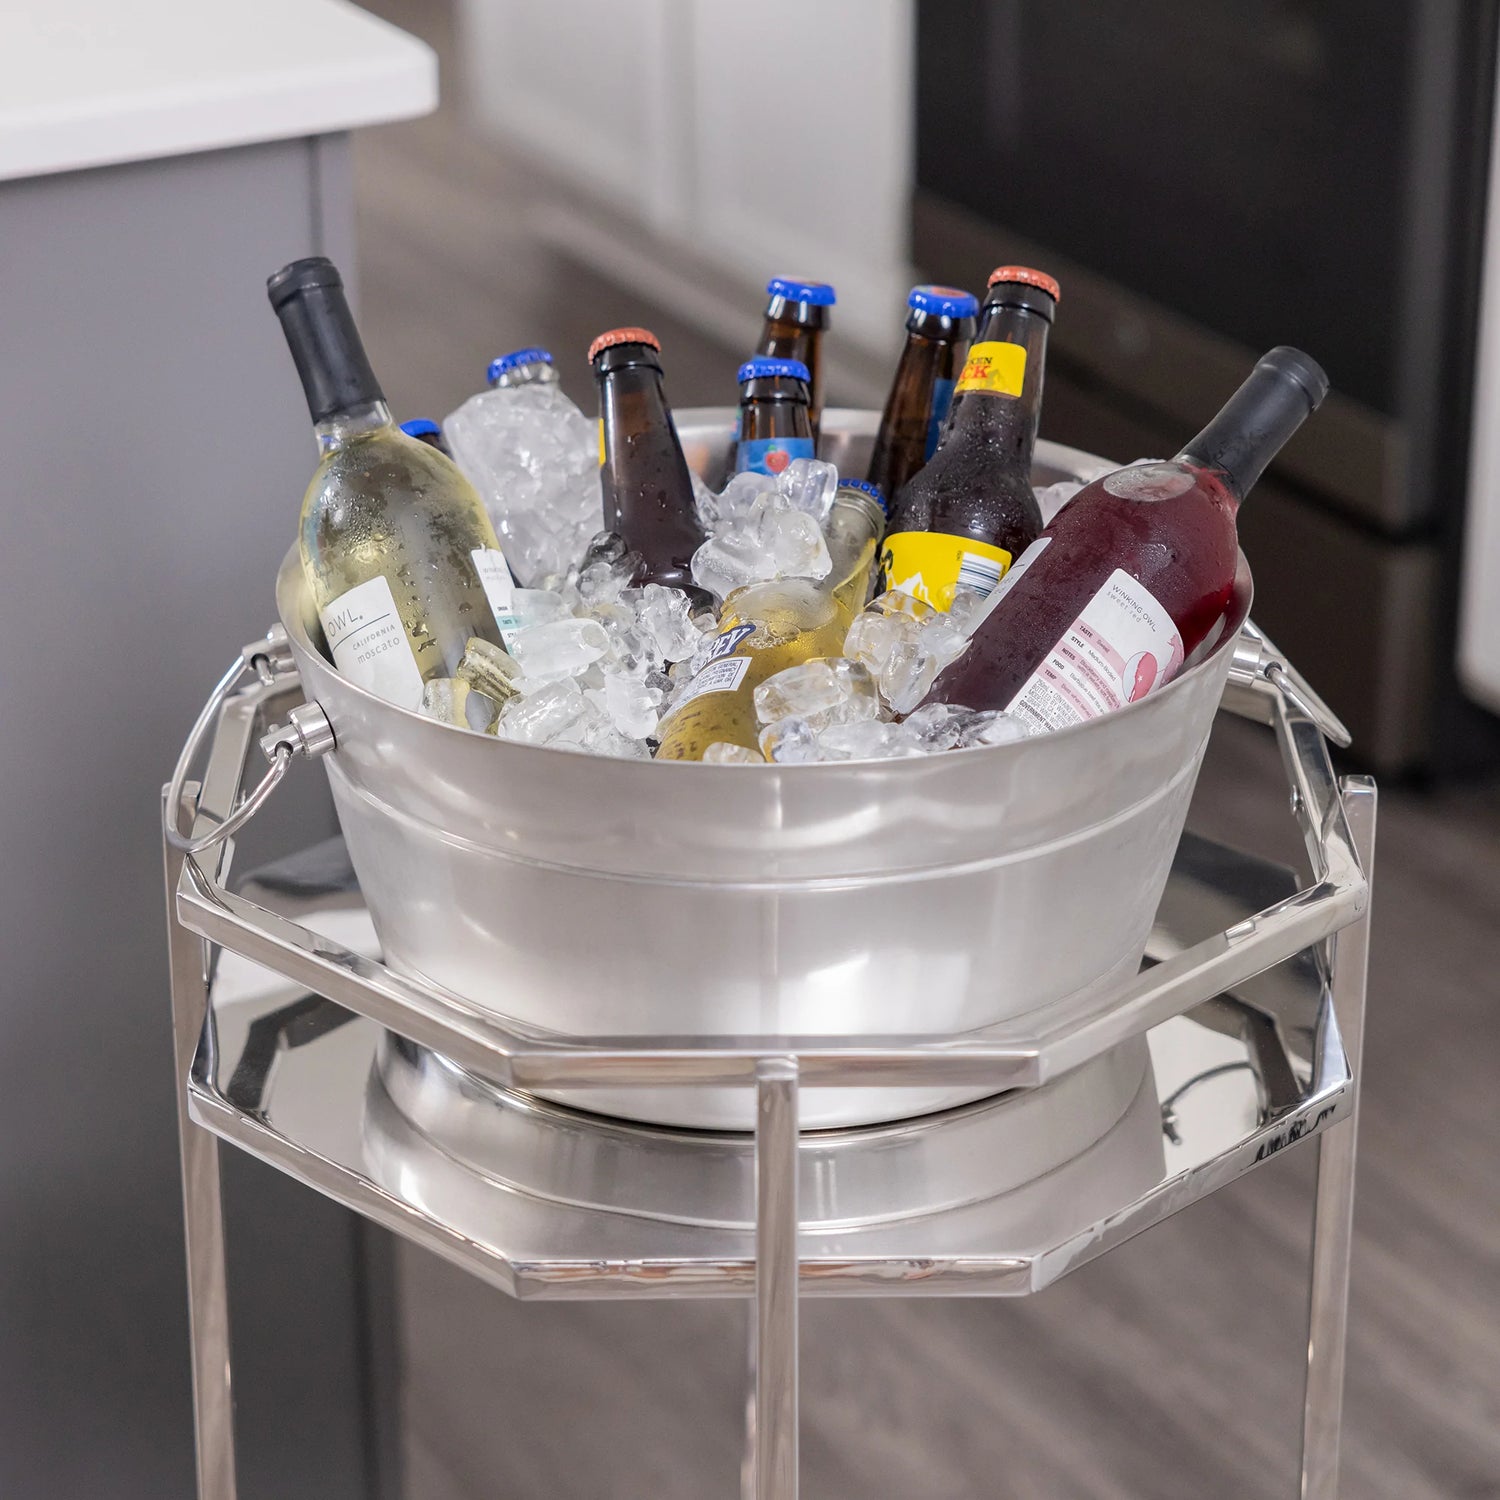 Insulated metal rolling cooler bar cart to chill drinks and wine for parties.  Includes shelves to hold wine bottles and barware or bar tools.  Personalize the party tub with a custom name, initial, or monogram.